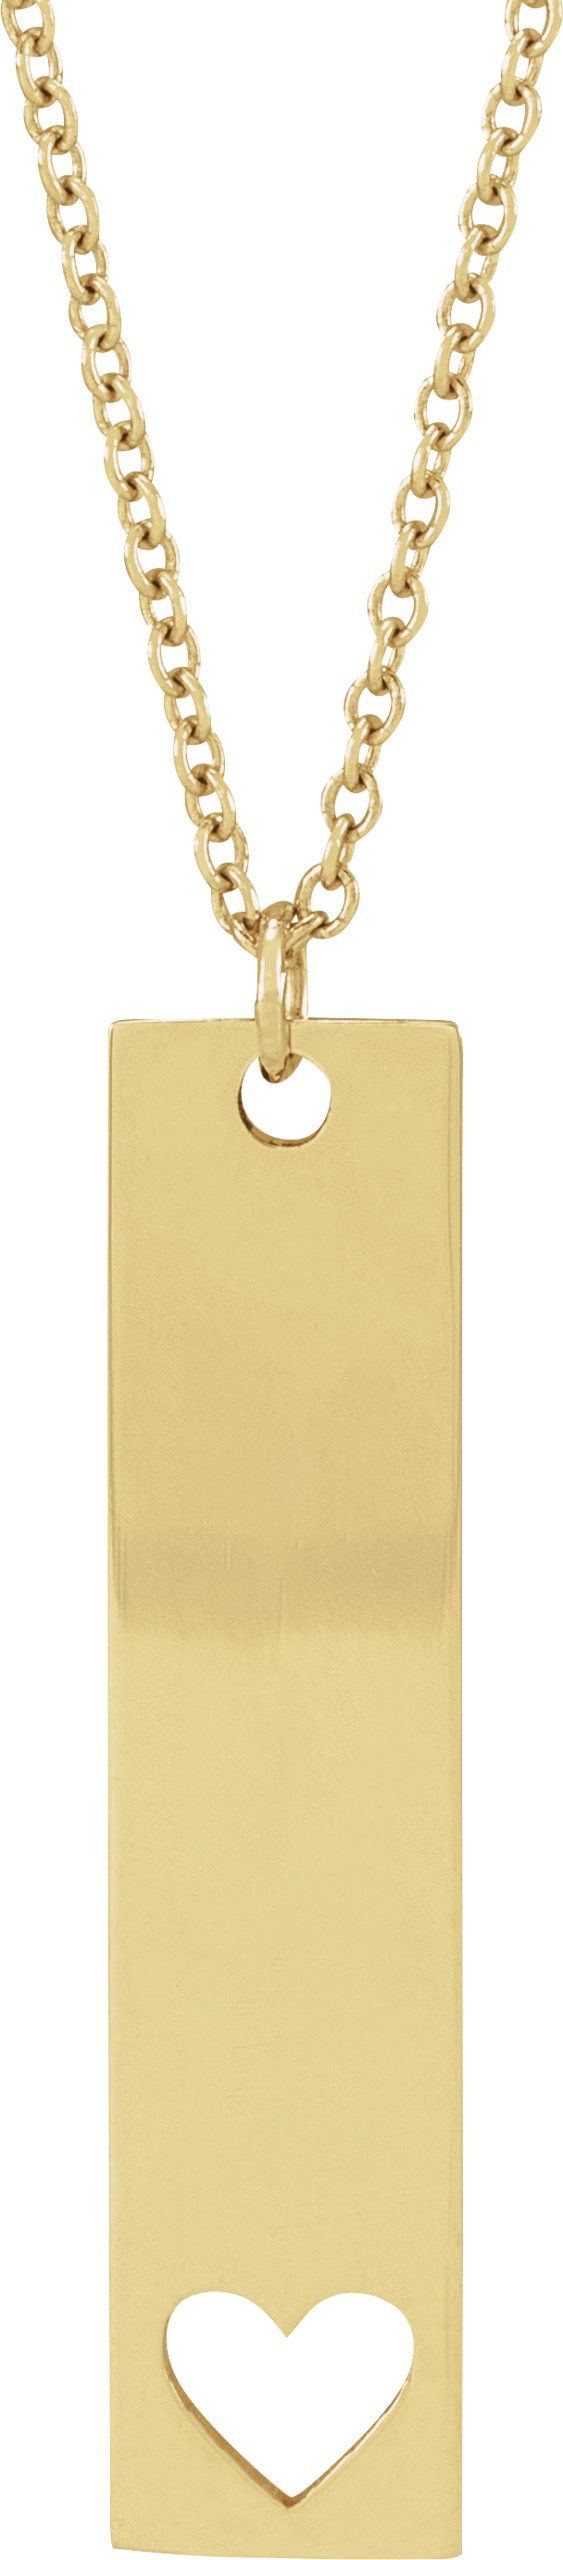 14K Yellow Engravable Bar 16-18" Necklace